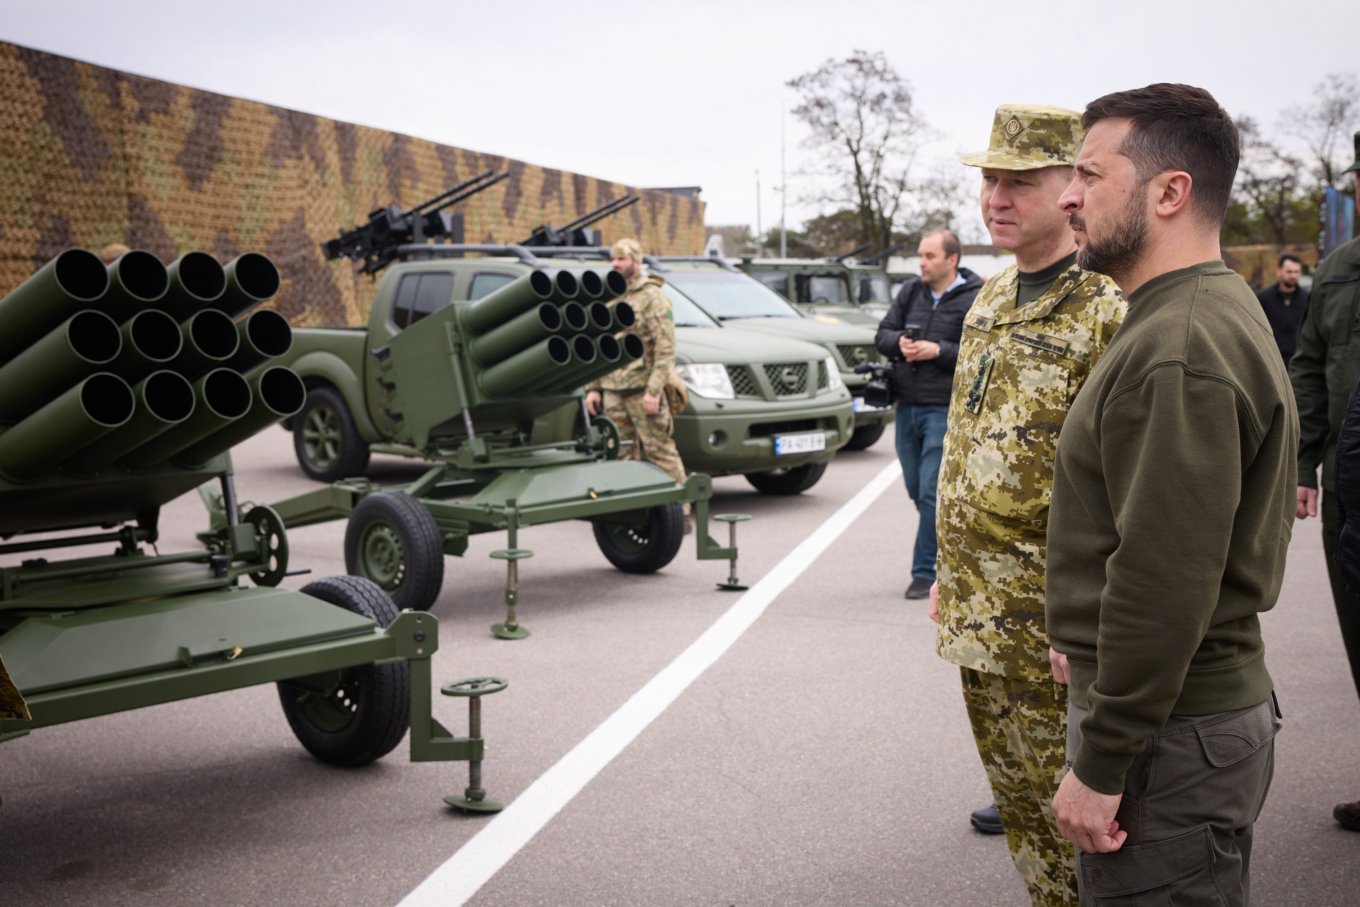 Ukrainian President Zelensky oversees new weapons of the border guards, April 30, 2023